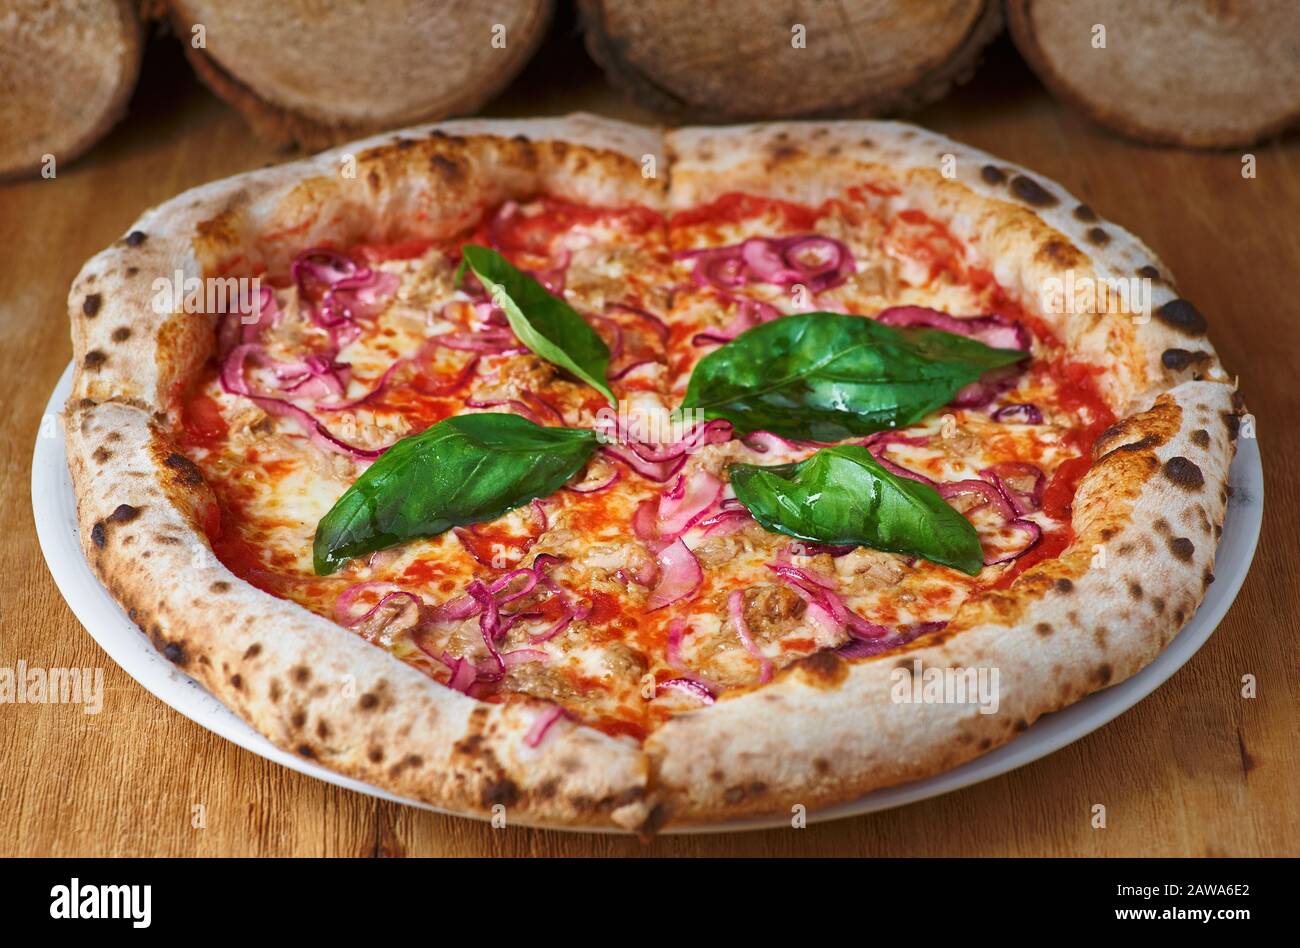 Italian Pizza With Tuna And Red Onion On A Wooden Board In A Rustic Kitchen Or Pizzeria On An Old Wooden Table Stock Photo Alamy